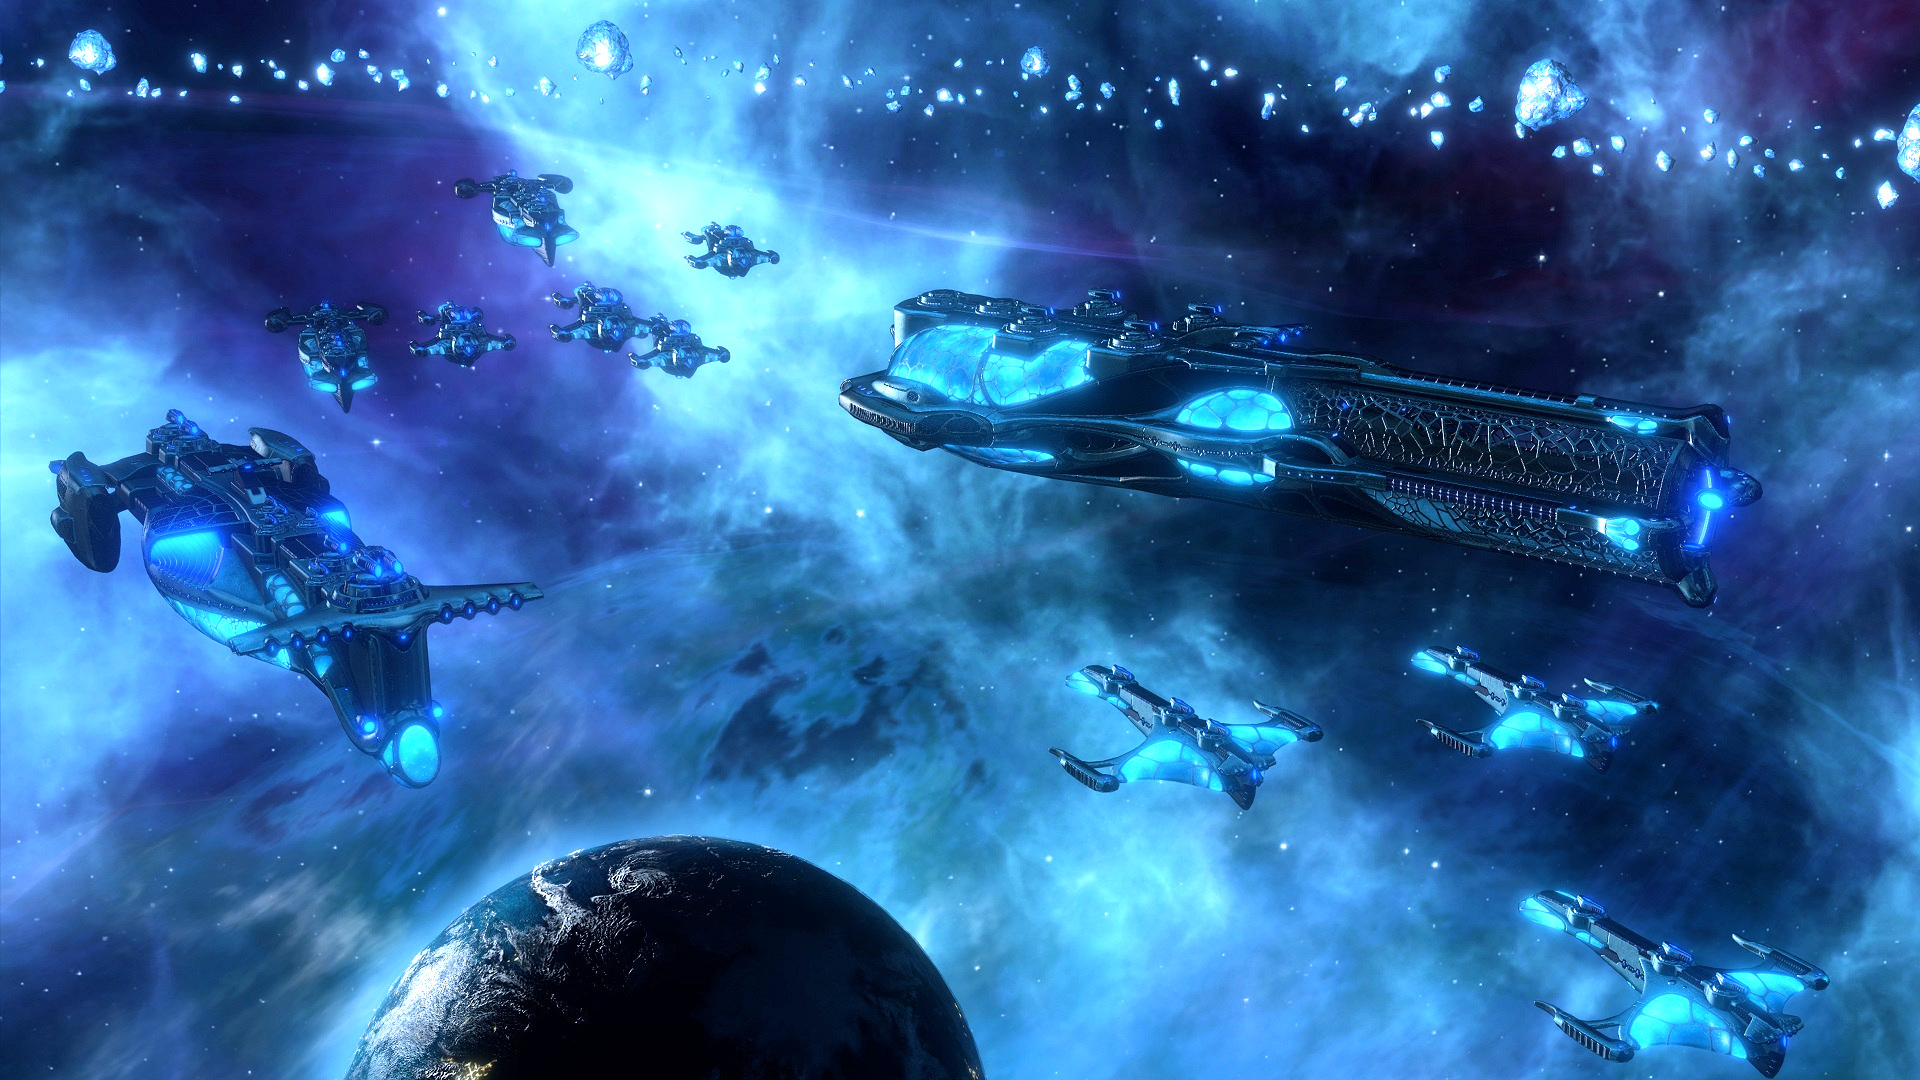 Here's more details on the new aquatic Stellaris DLC